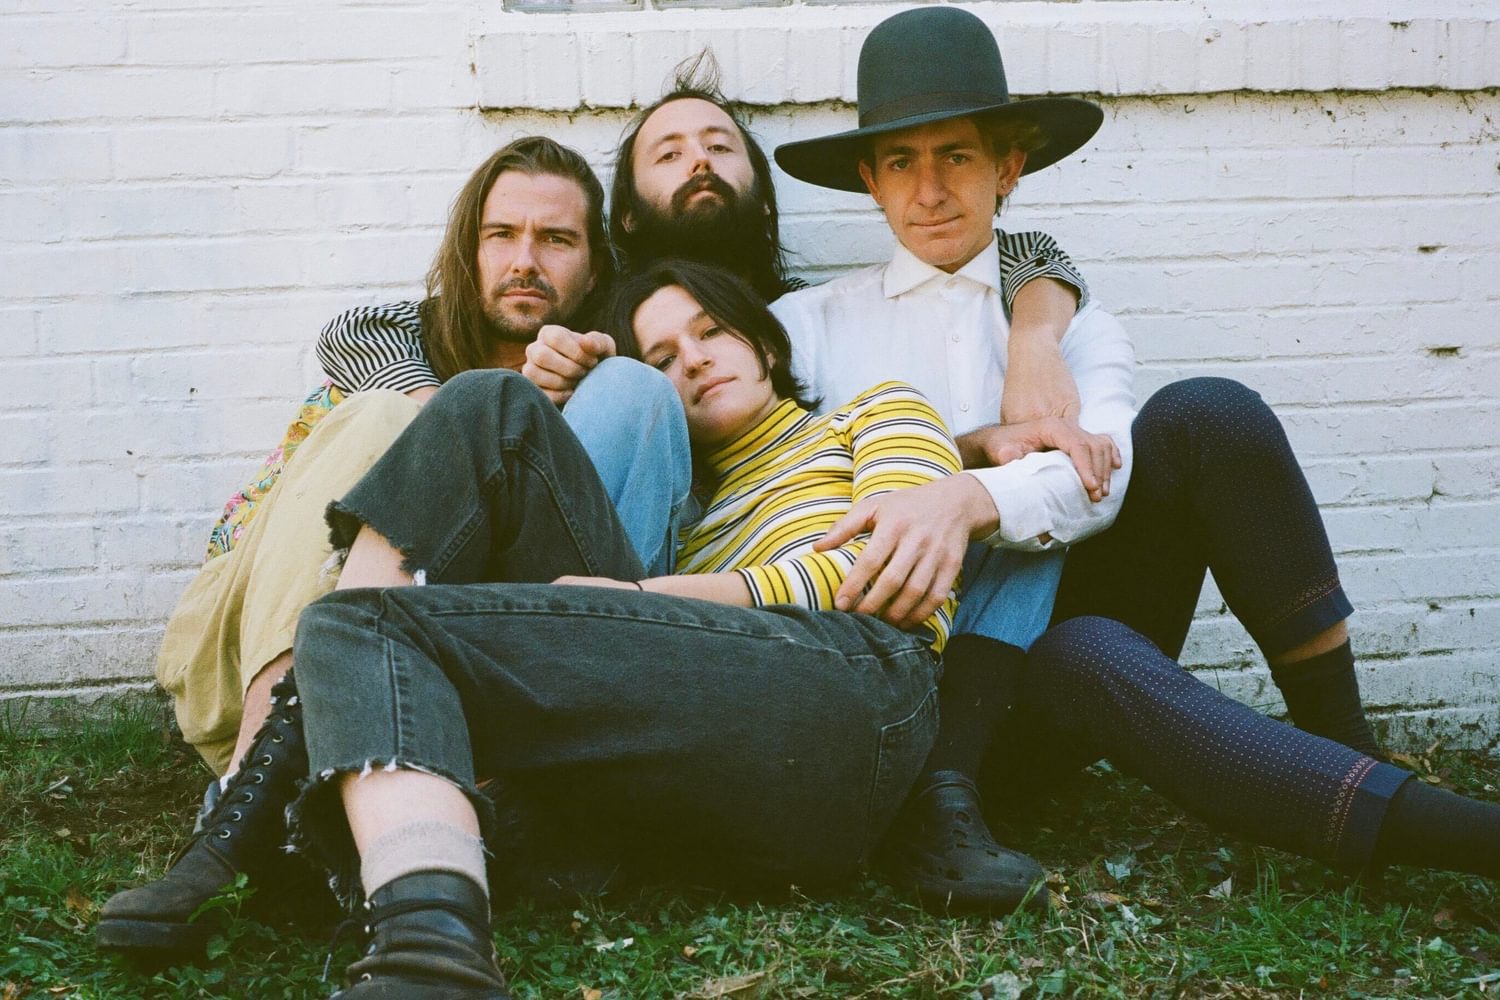 Big Thief to release new album ‘U.F.O.F.’ this May